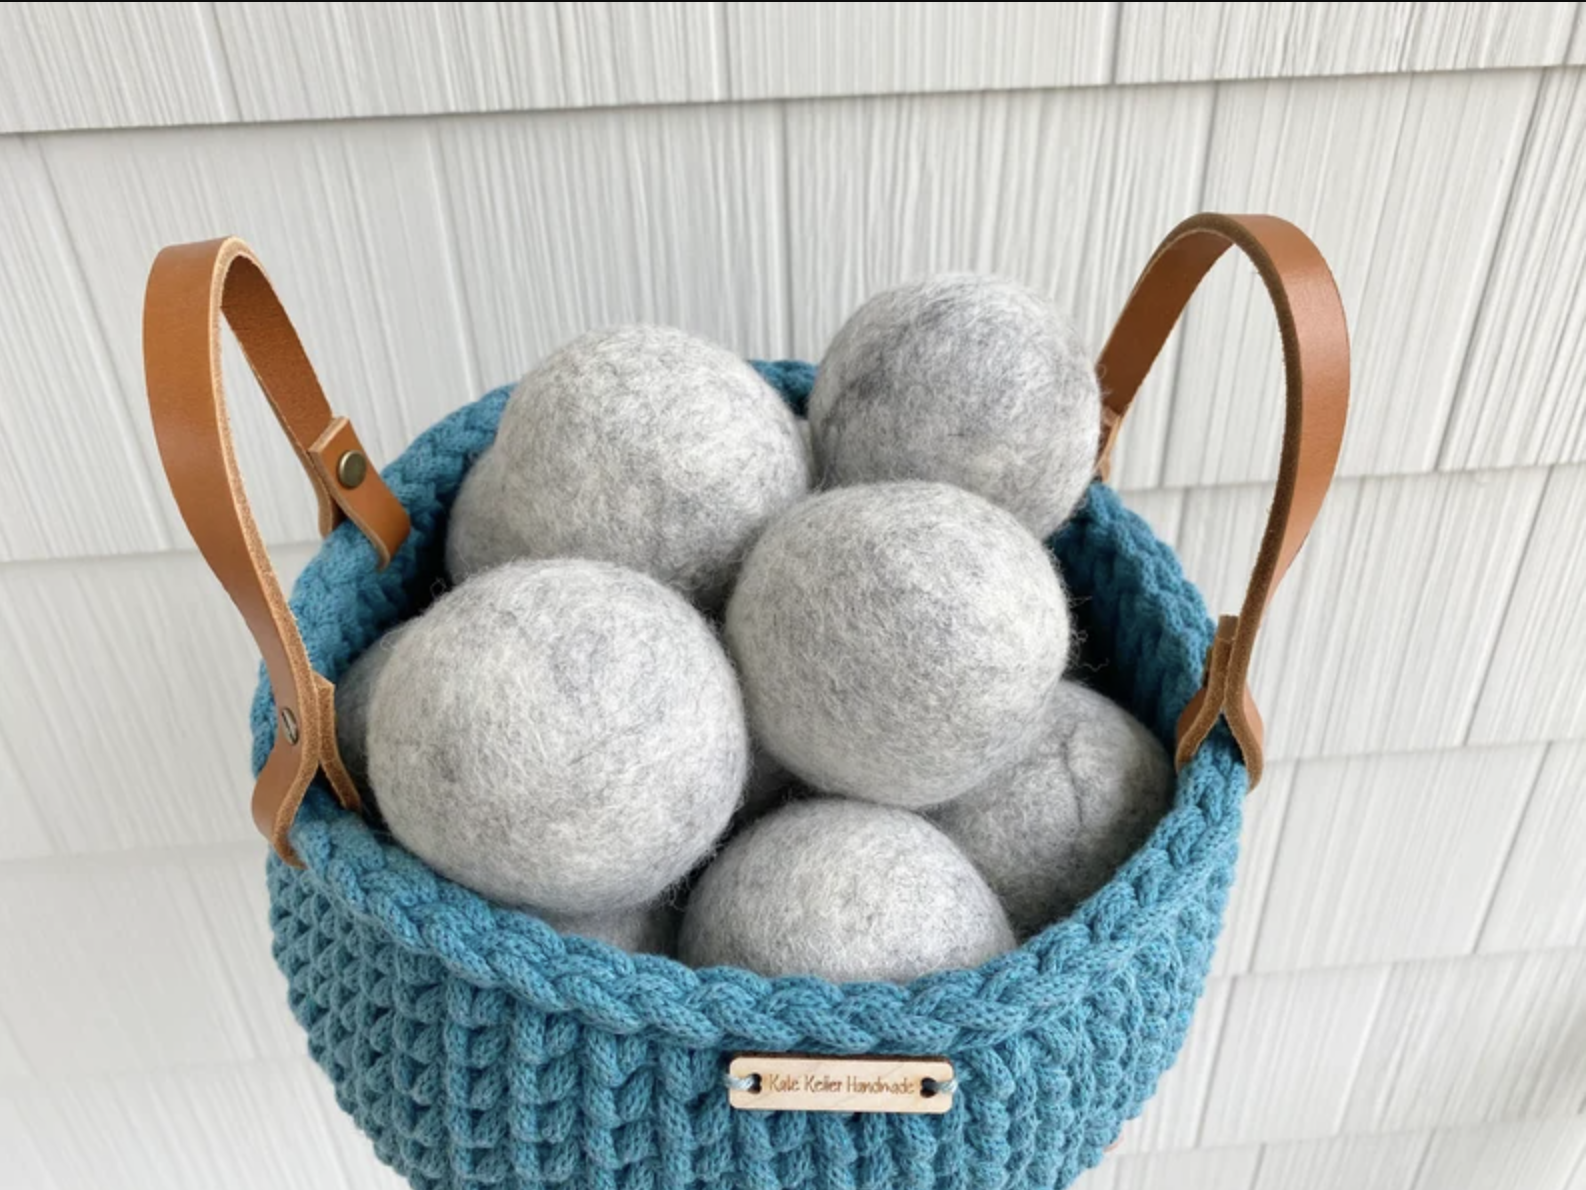 A bag of the grey dryer balls are shown in a blue basket